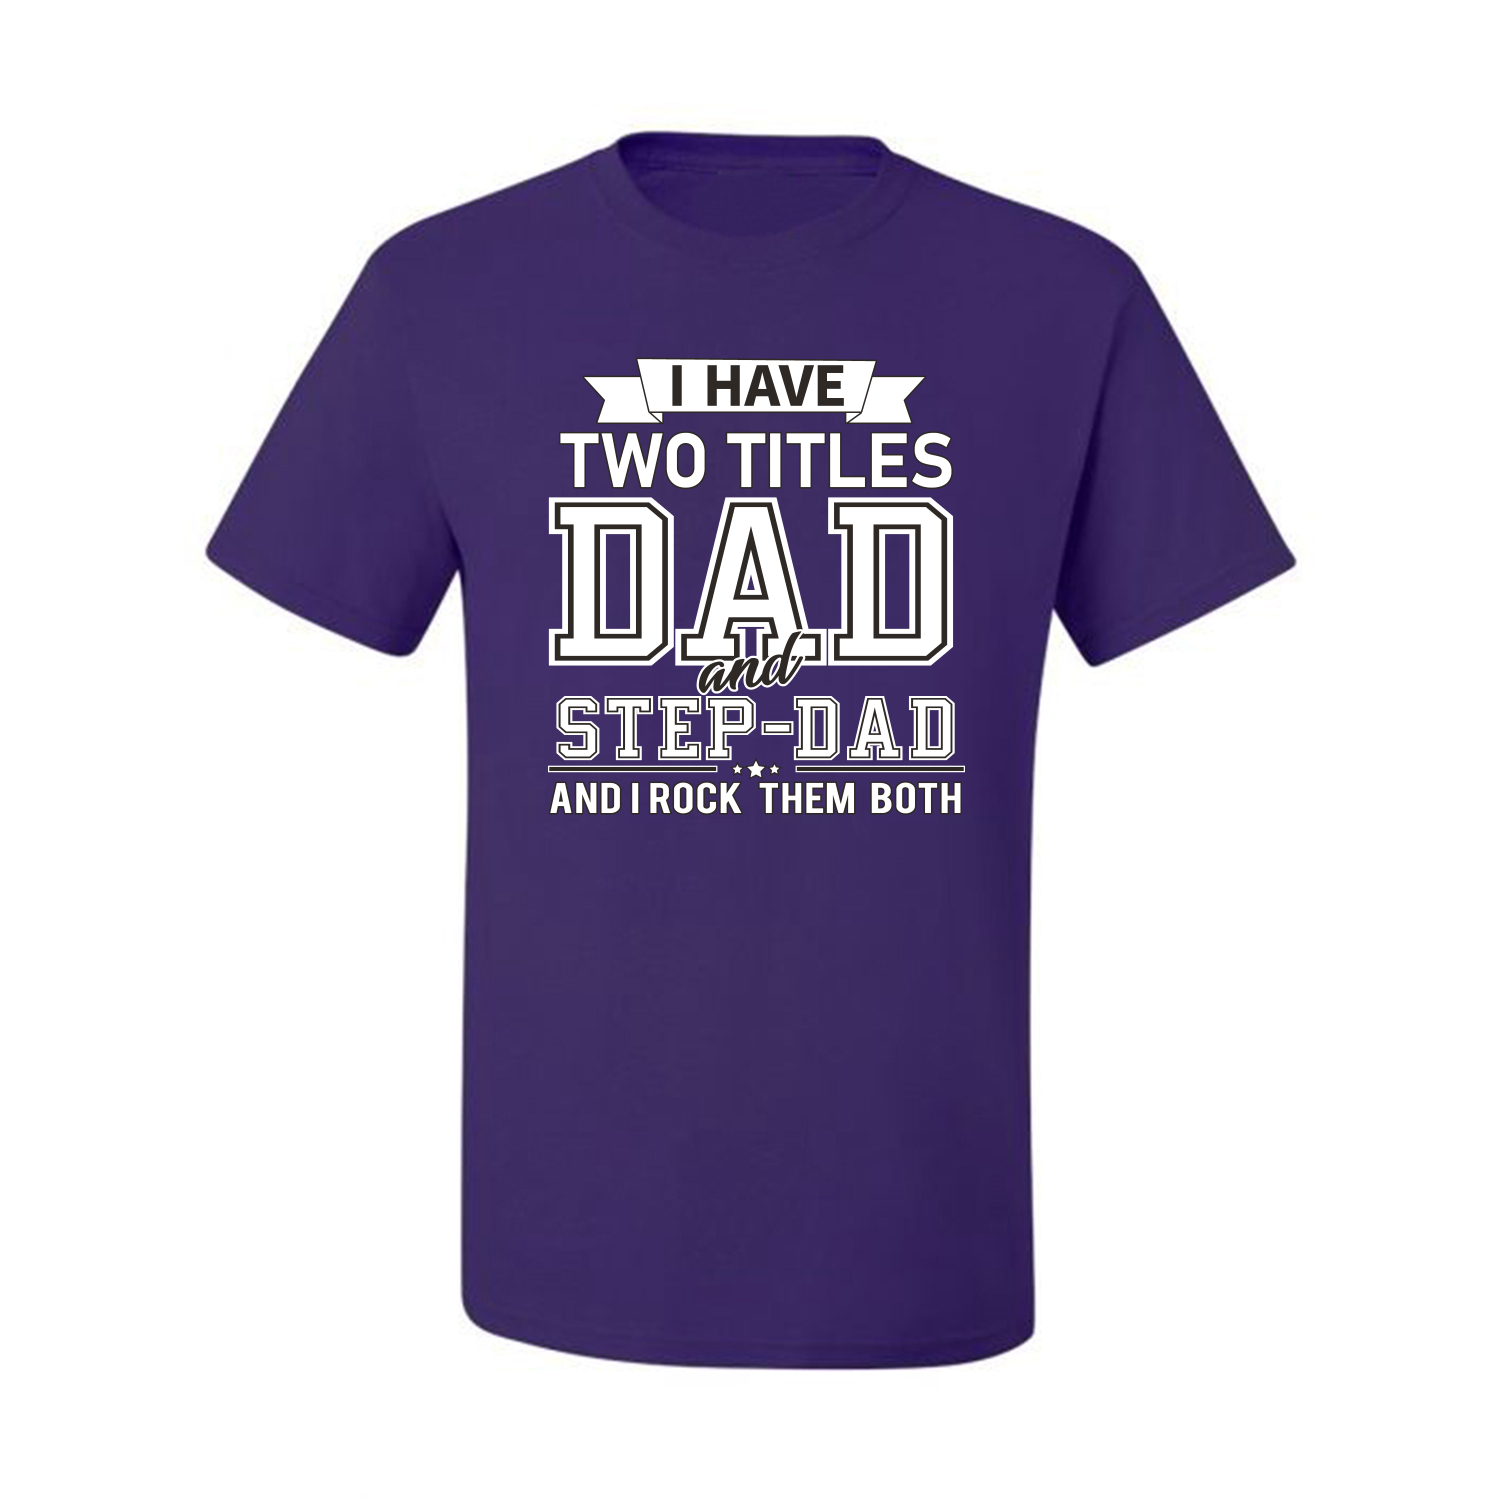 Wild Bobby,I Have Two Titles Dad and Step Dad Rock Them Both Step Dad Gift, Father's Day, Men Graphic Tees, Purple, 4XL - image 2 of 3